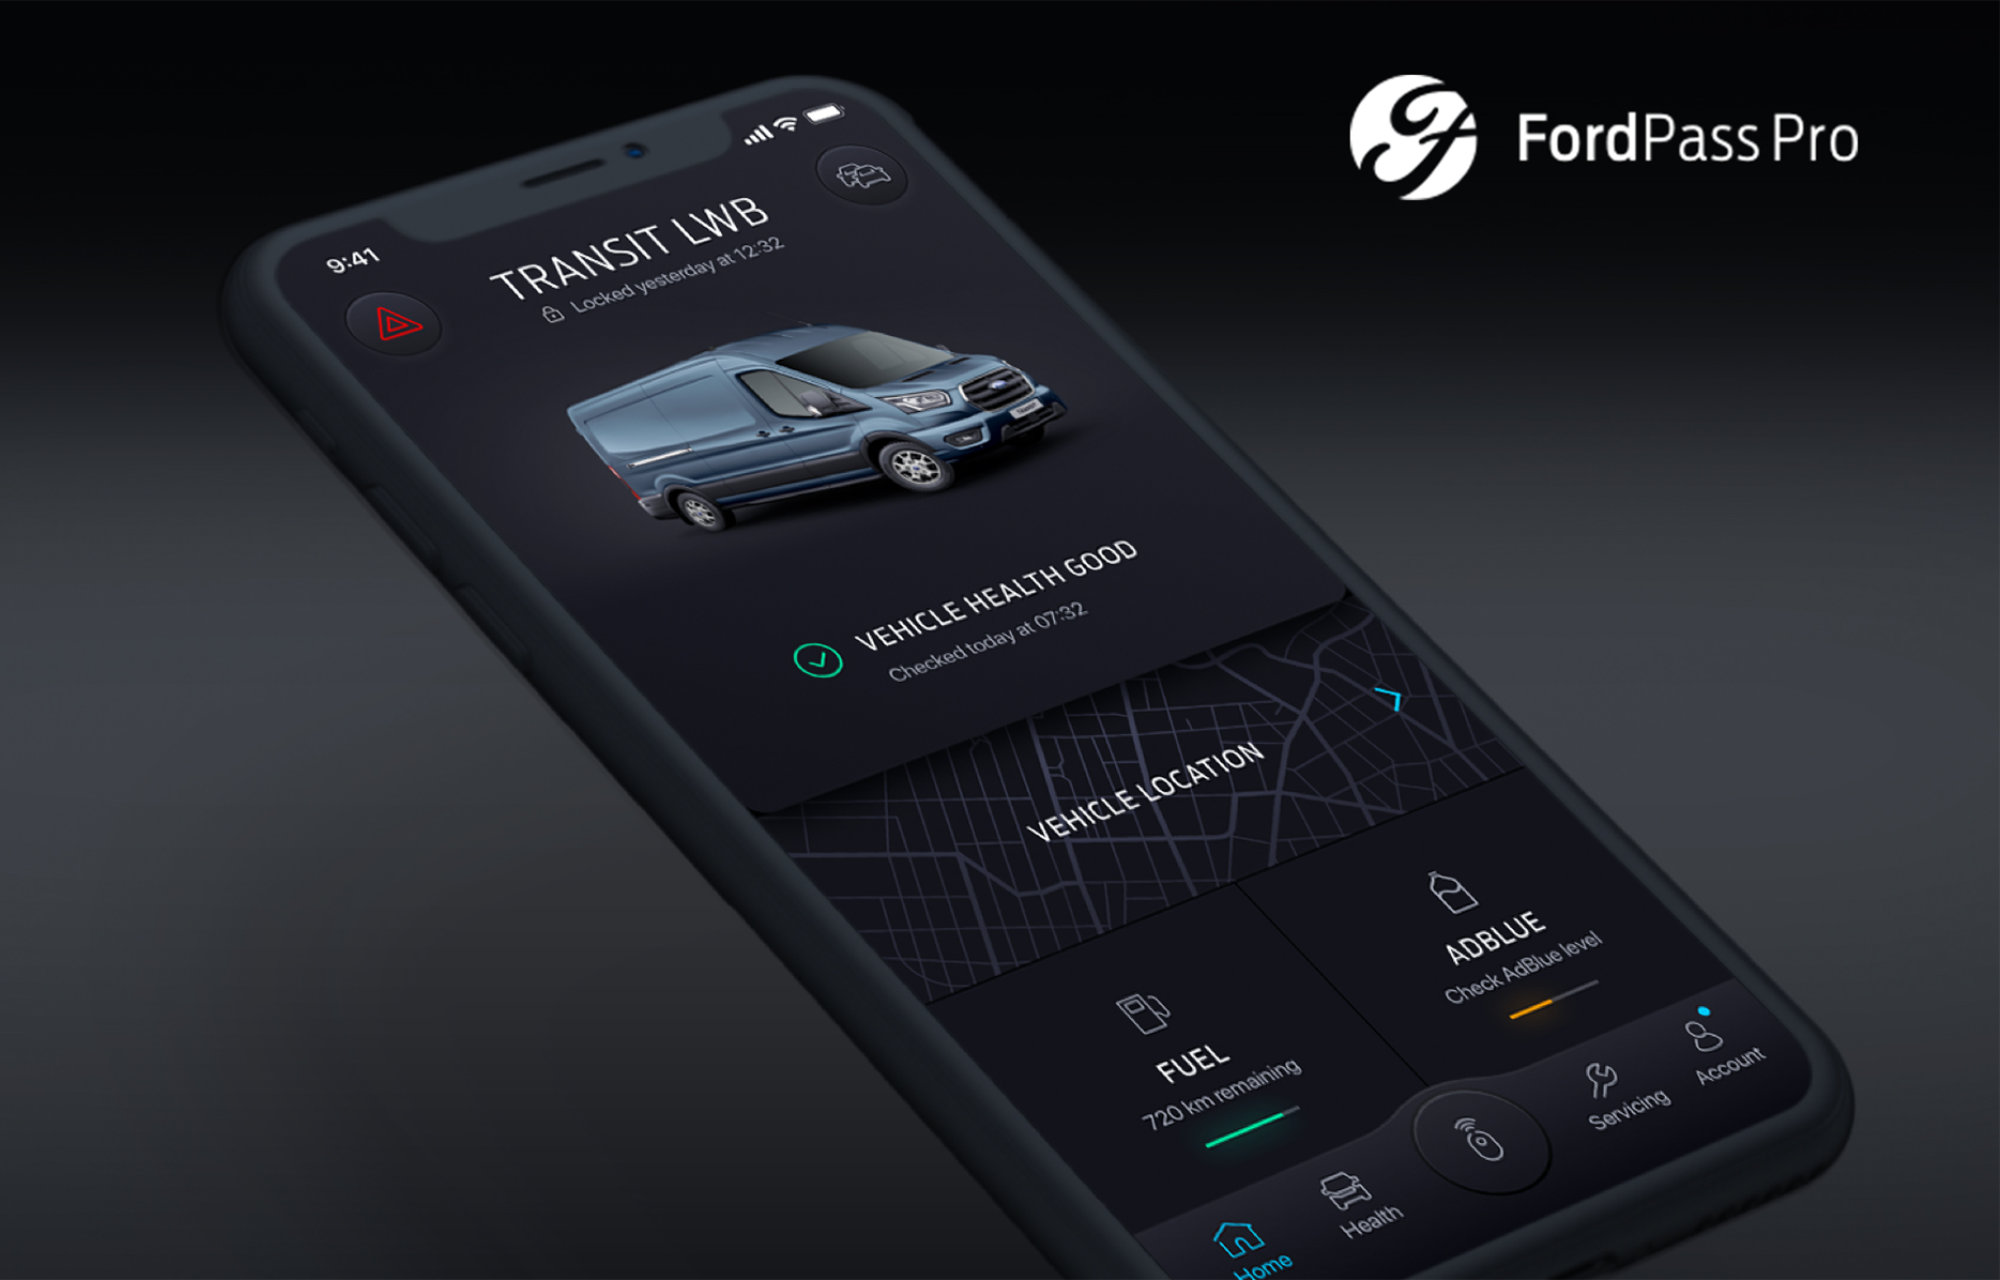 Introducing FordPass Pro